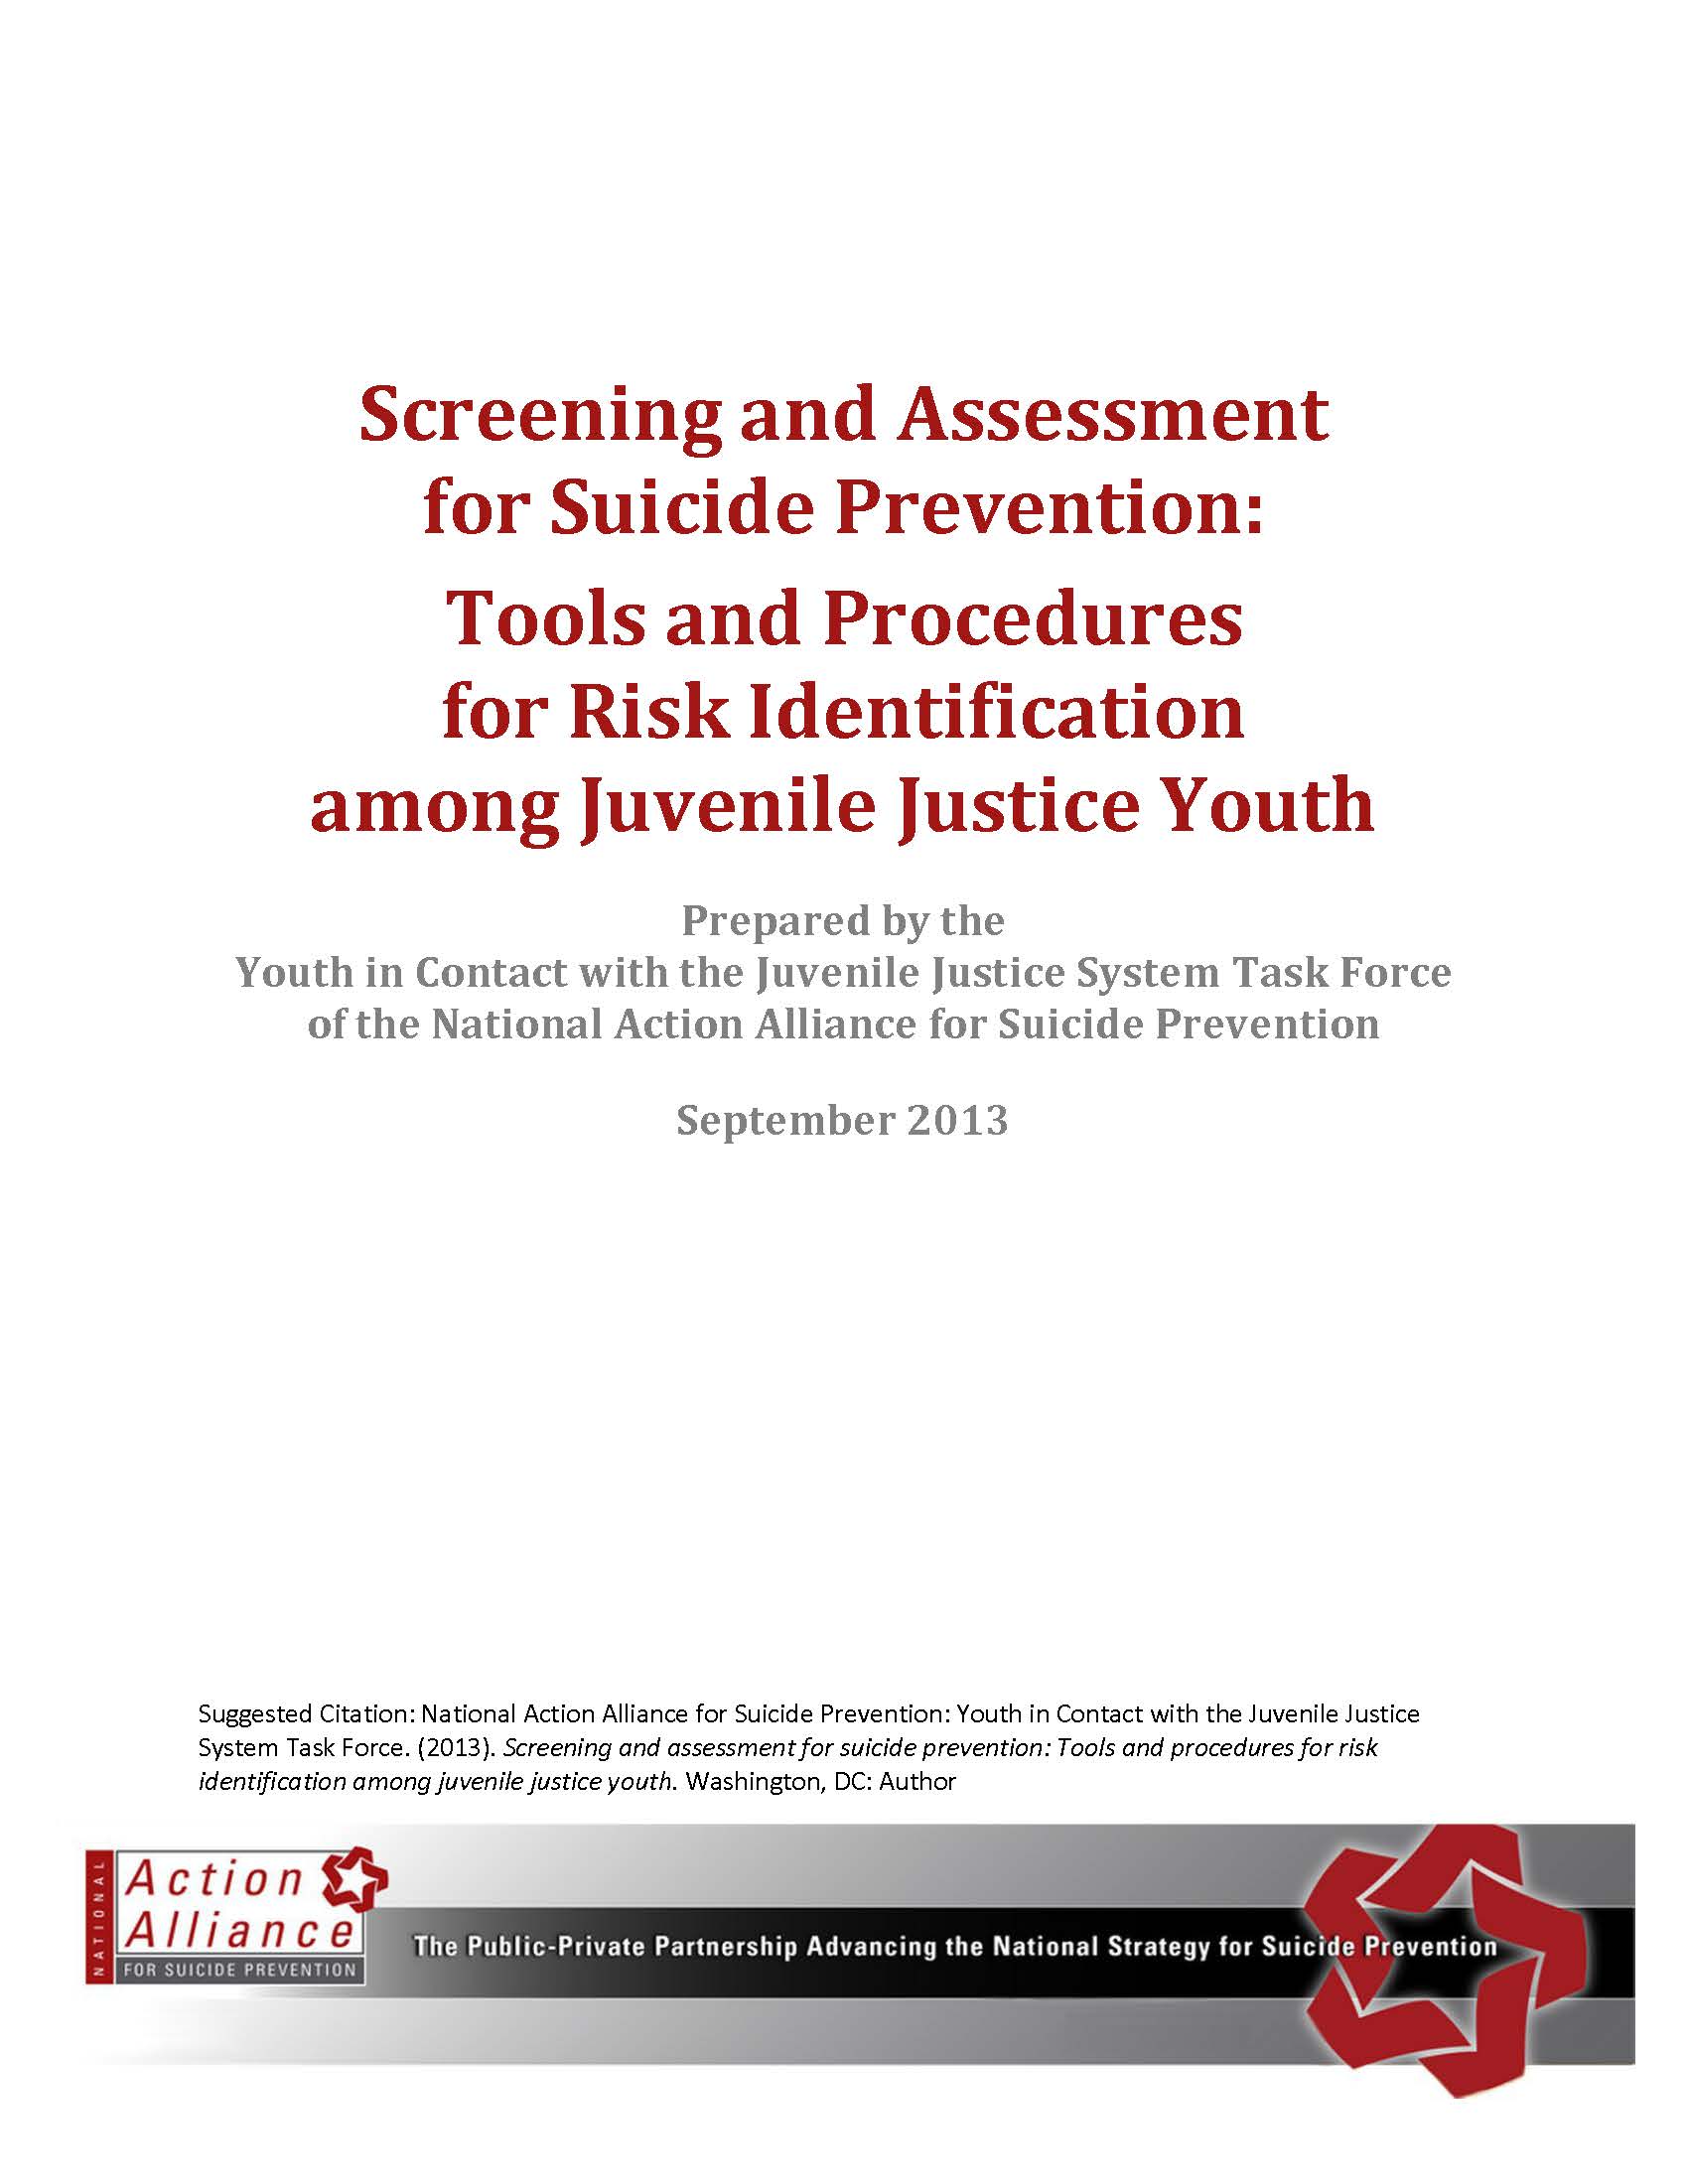 Screening and Assessment for Suicide Prevention: Tools and Procedures for Risk Identification and Risk Reduction among Juvenile Justice Youth